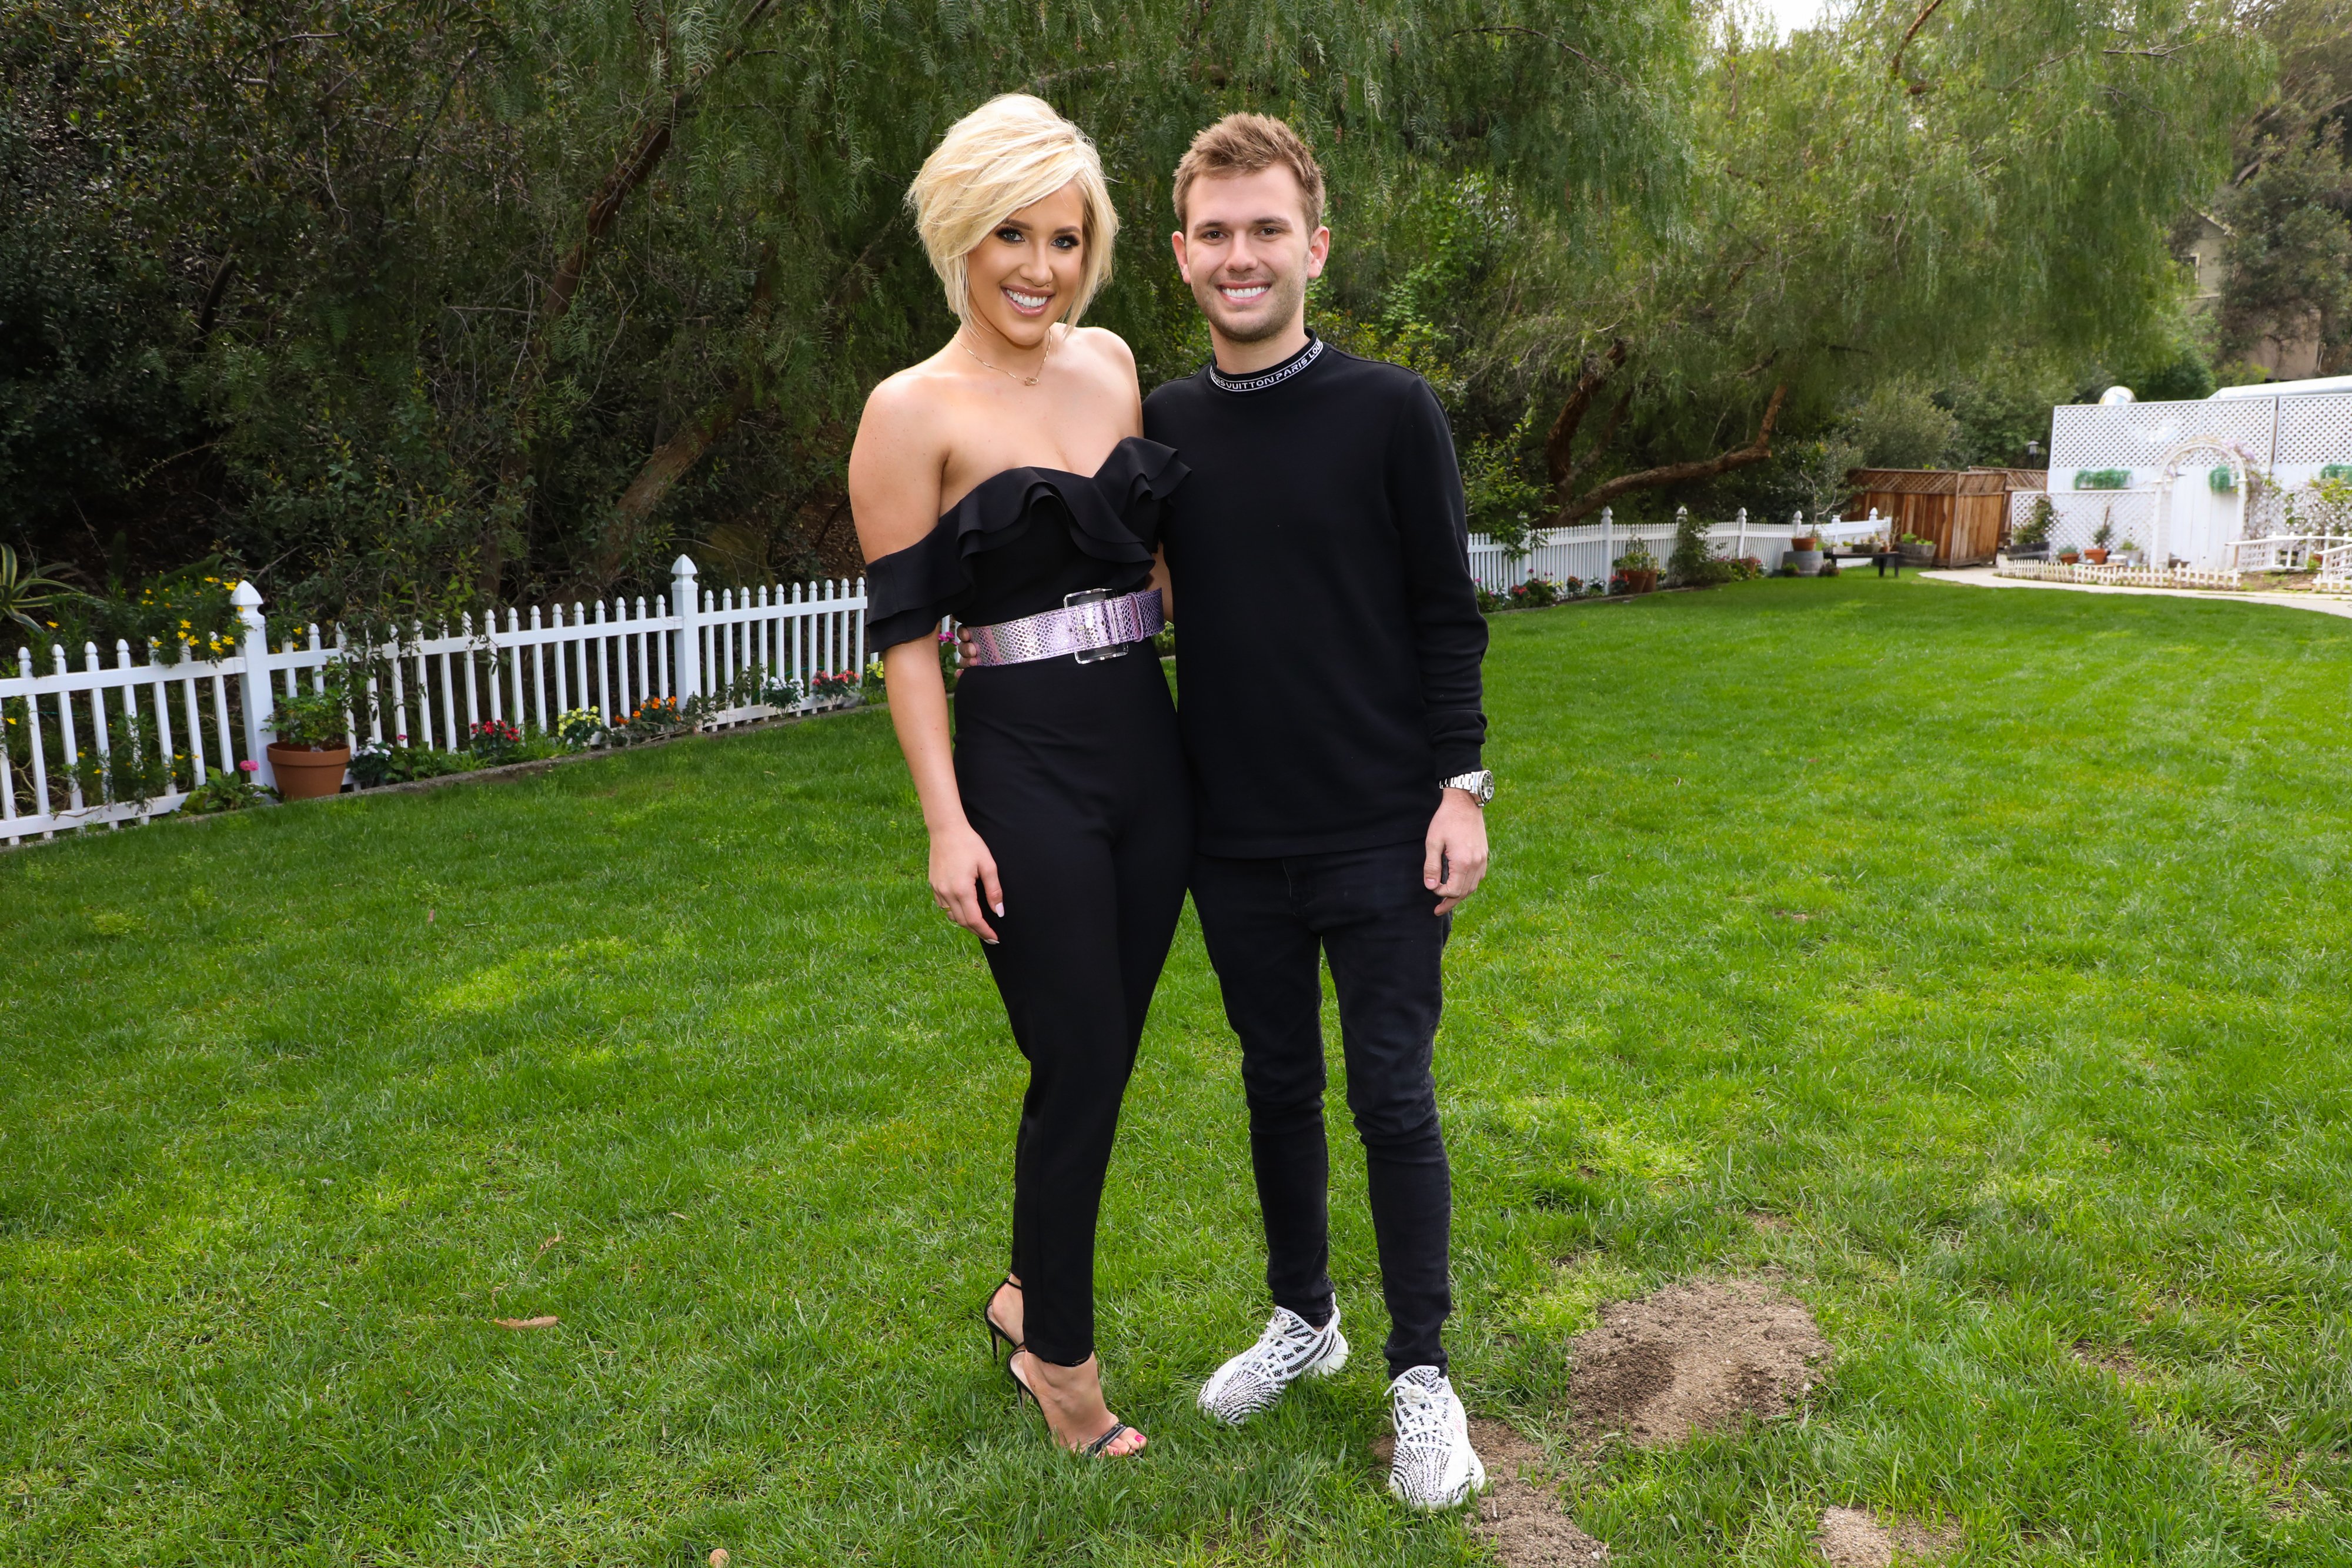 Savannah Chrisley and Chase Chrisley visit Hallmark's "Home & Family" at Universal Studios Hollywood on March 27, 2019 in Universal City, California | Photo: Getty Images